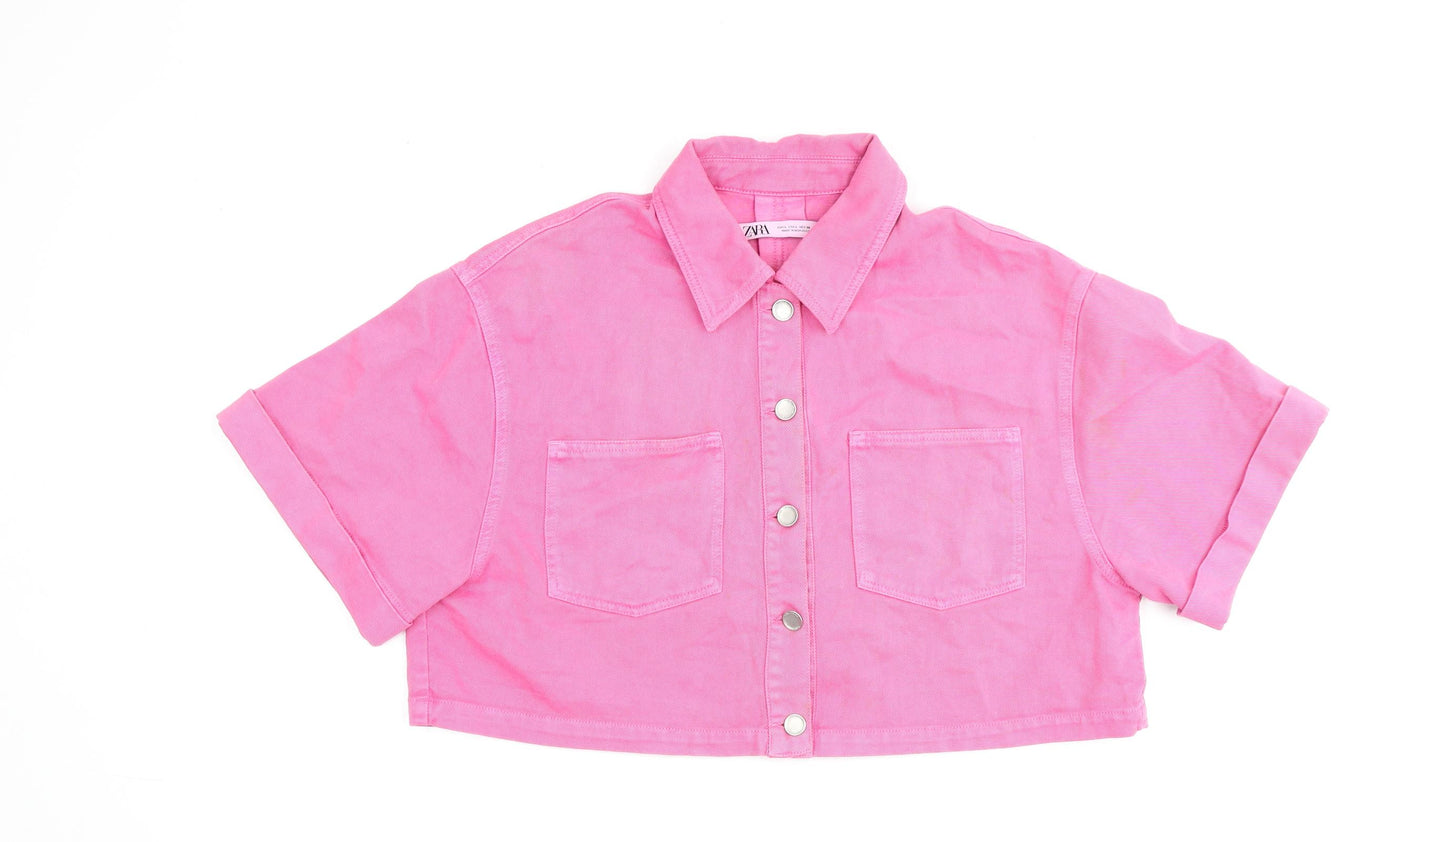 Zara Womens Pink 100% Cotton Basic Button-Up Size L Collared